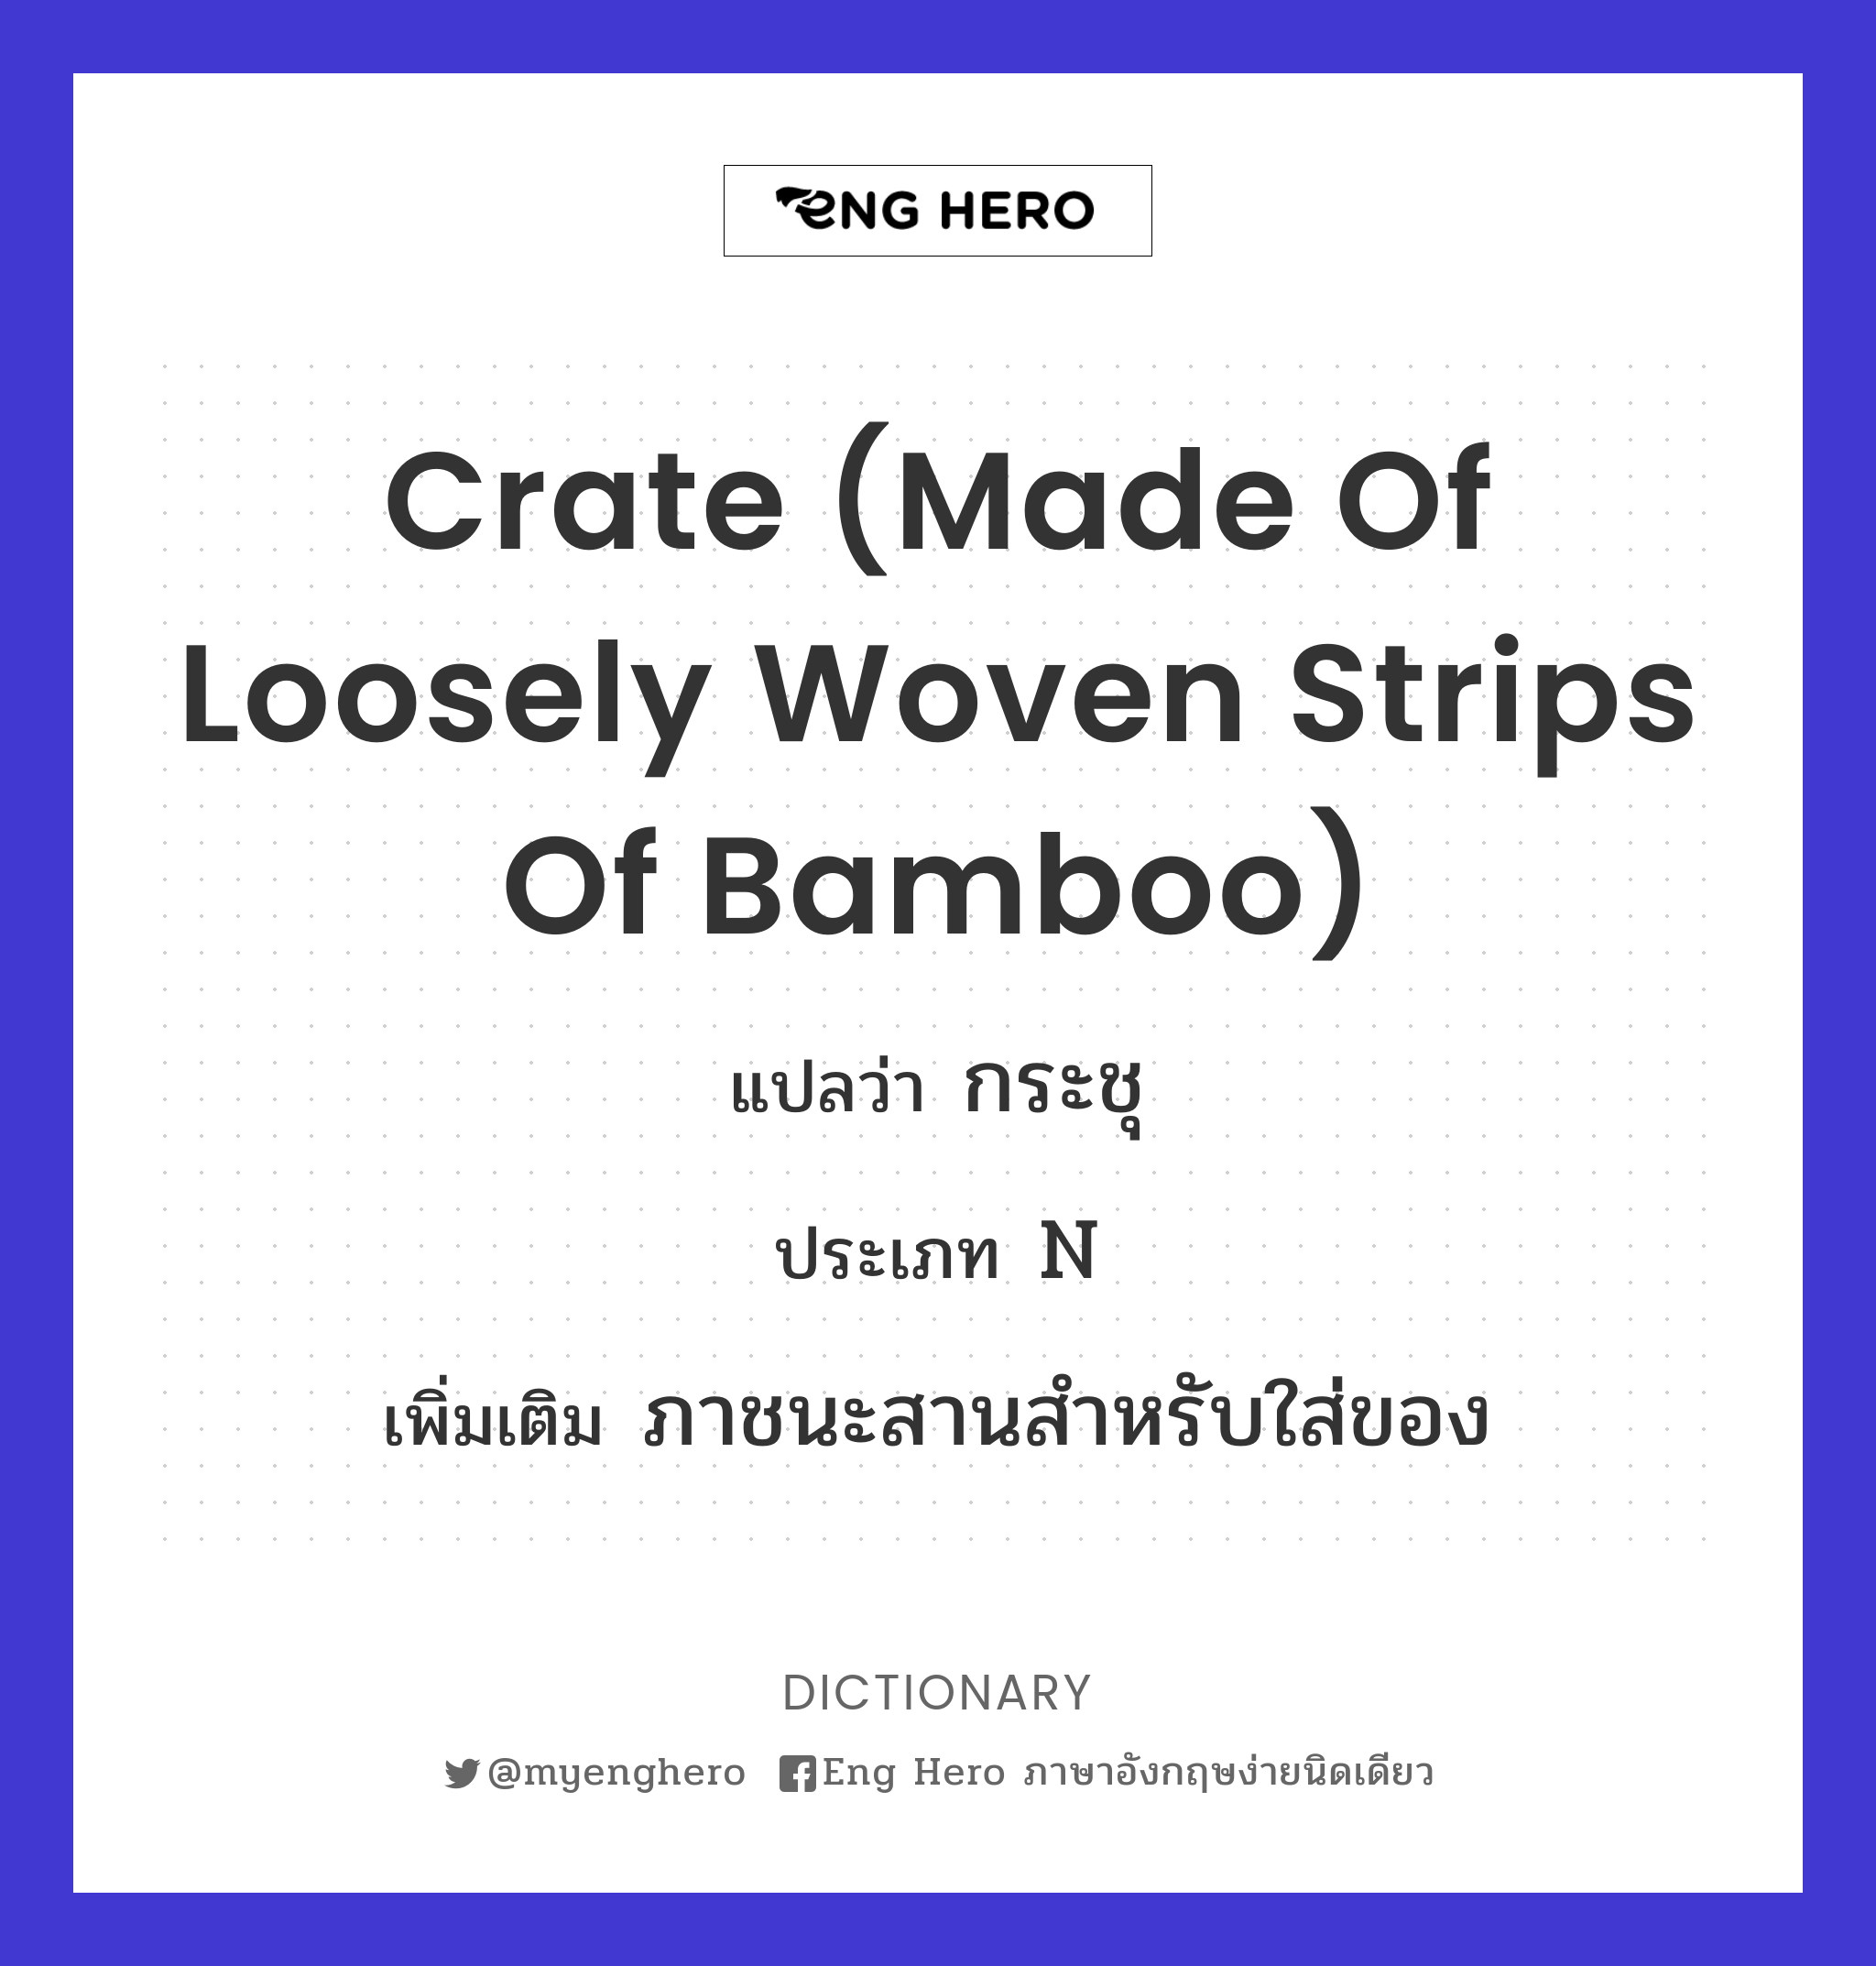 crate (made of loosely woven strips of bamboo)